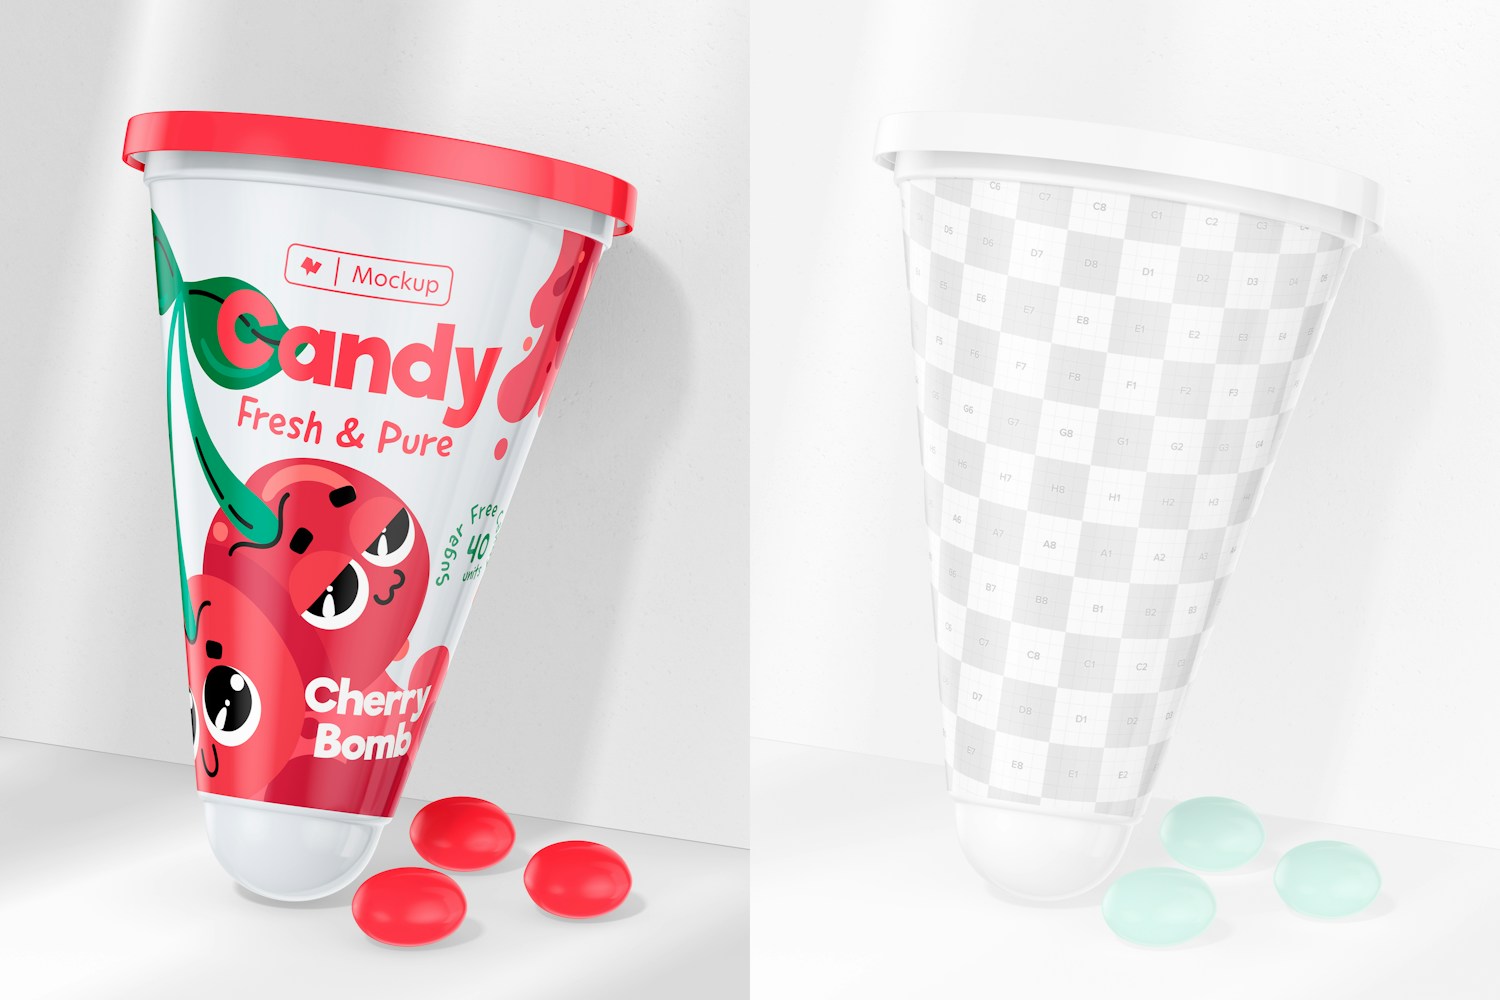 Pyramid Candy Packaging Mockup, Leaned